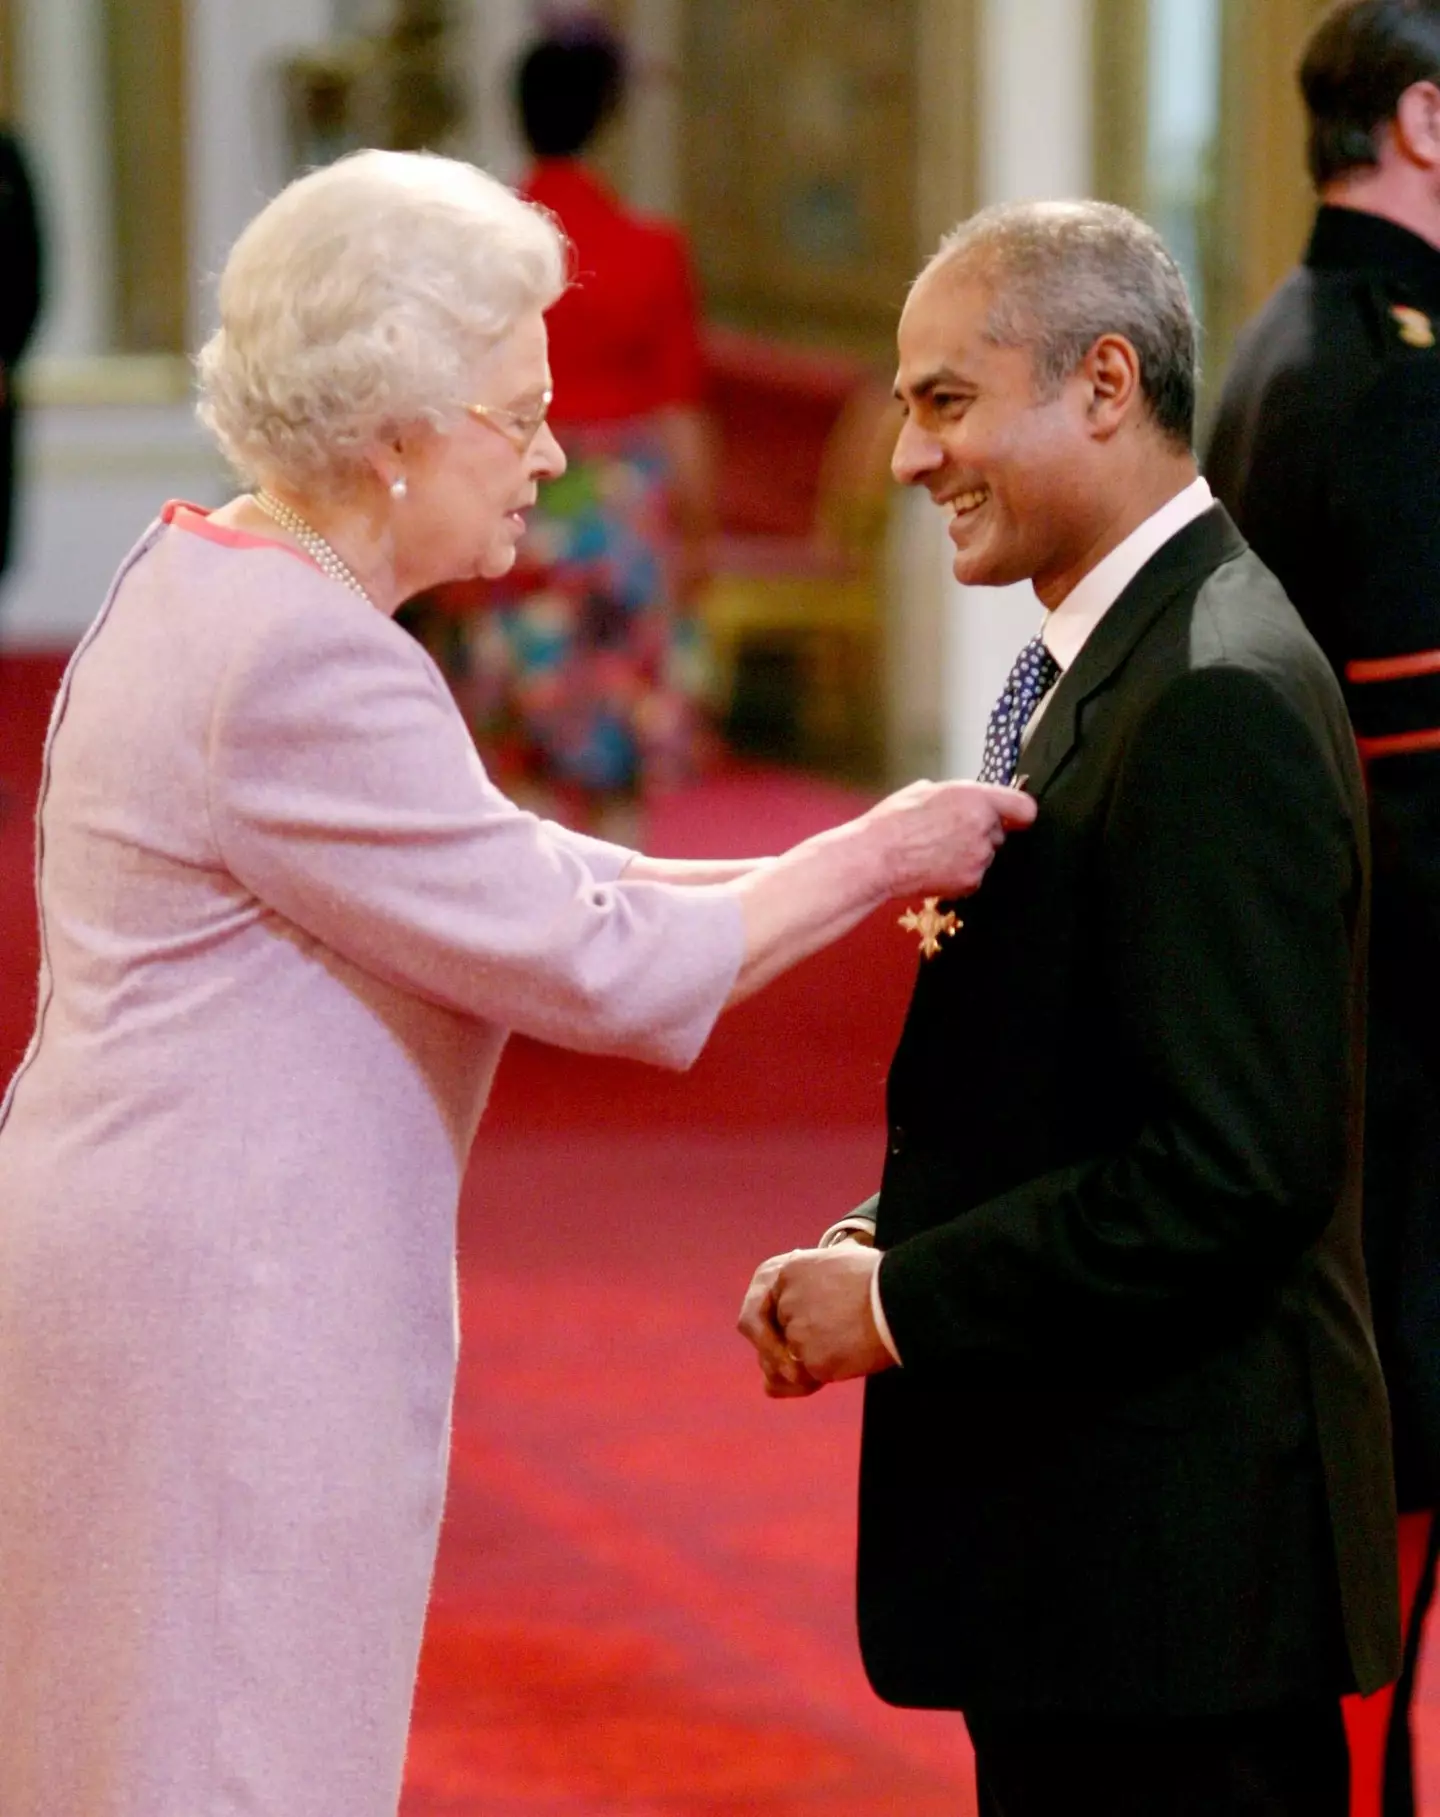 In 2008, George Alagiah was made an OBE in the New Year Honours list for services to journalism.